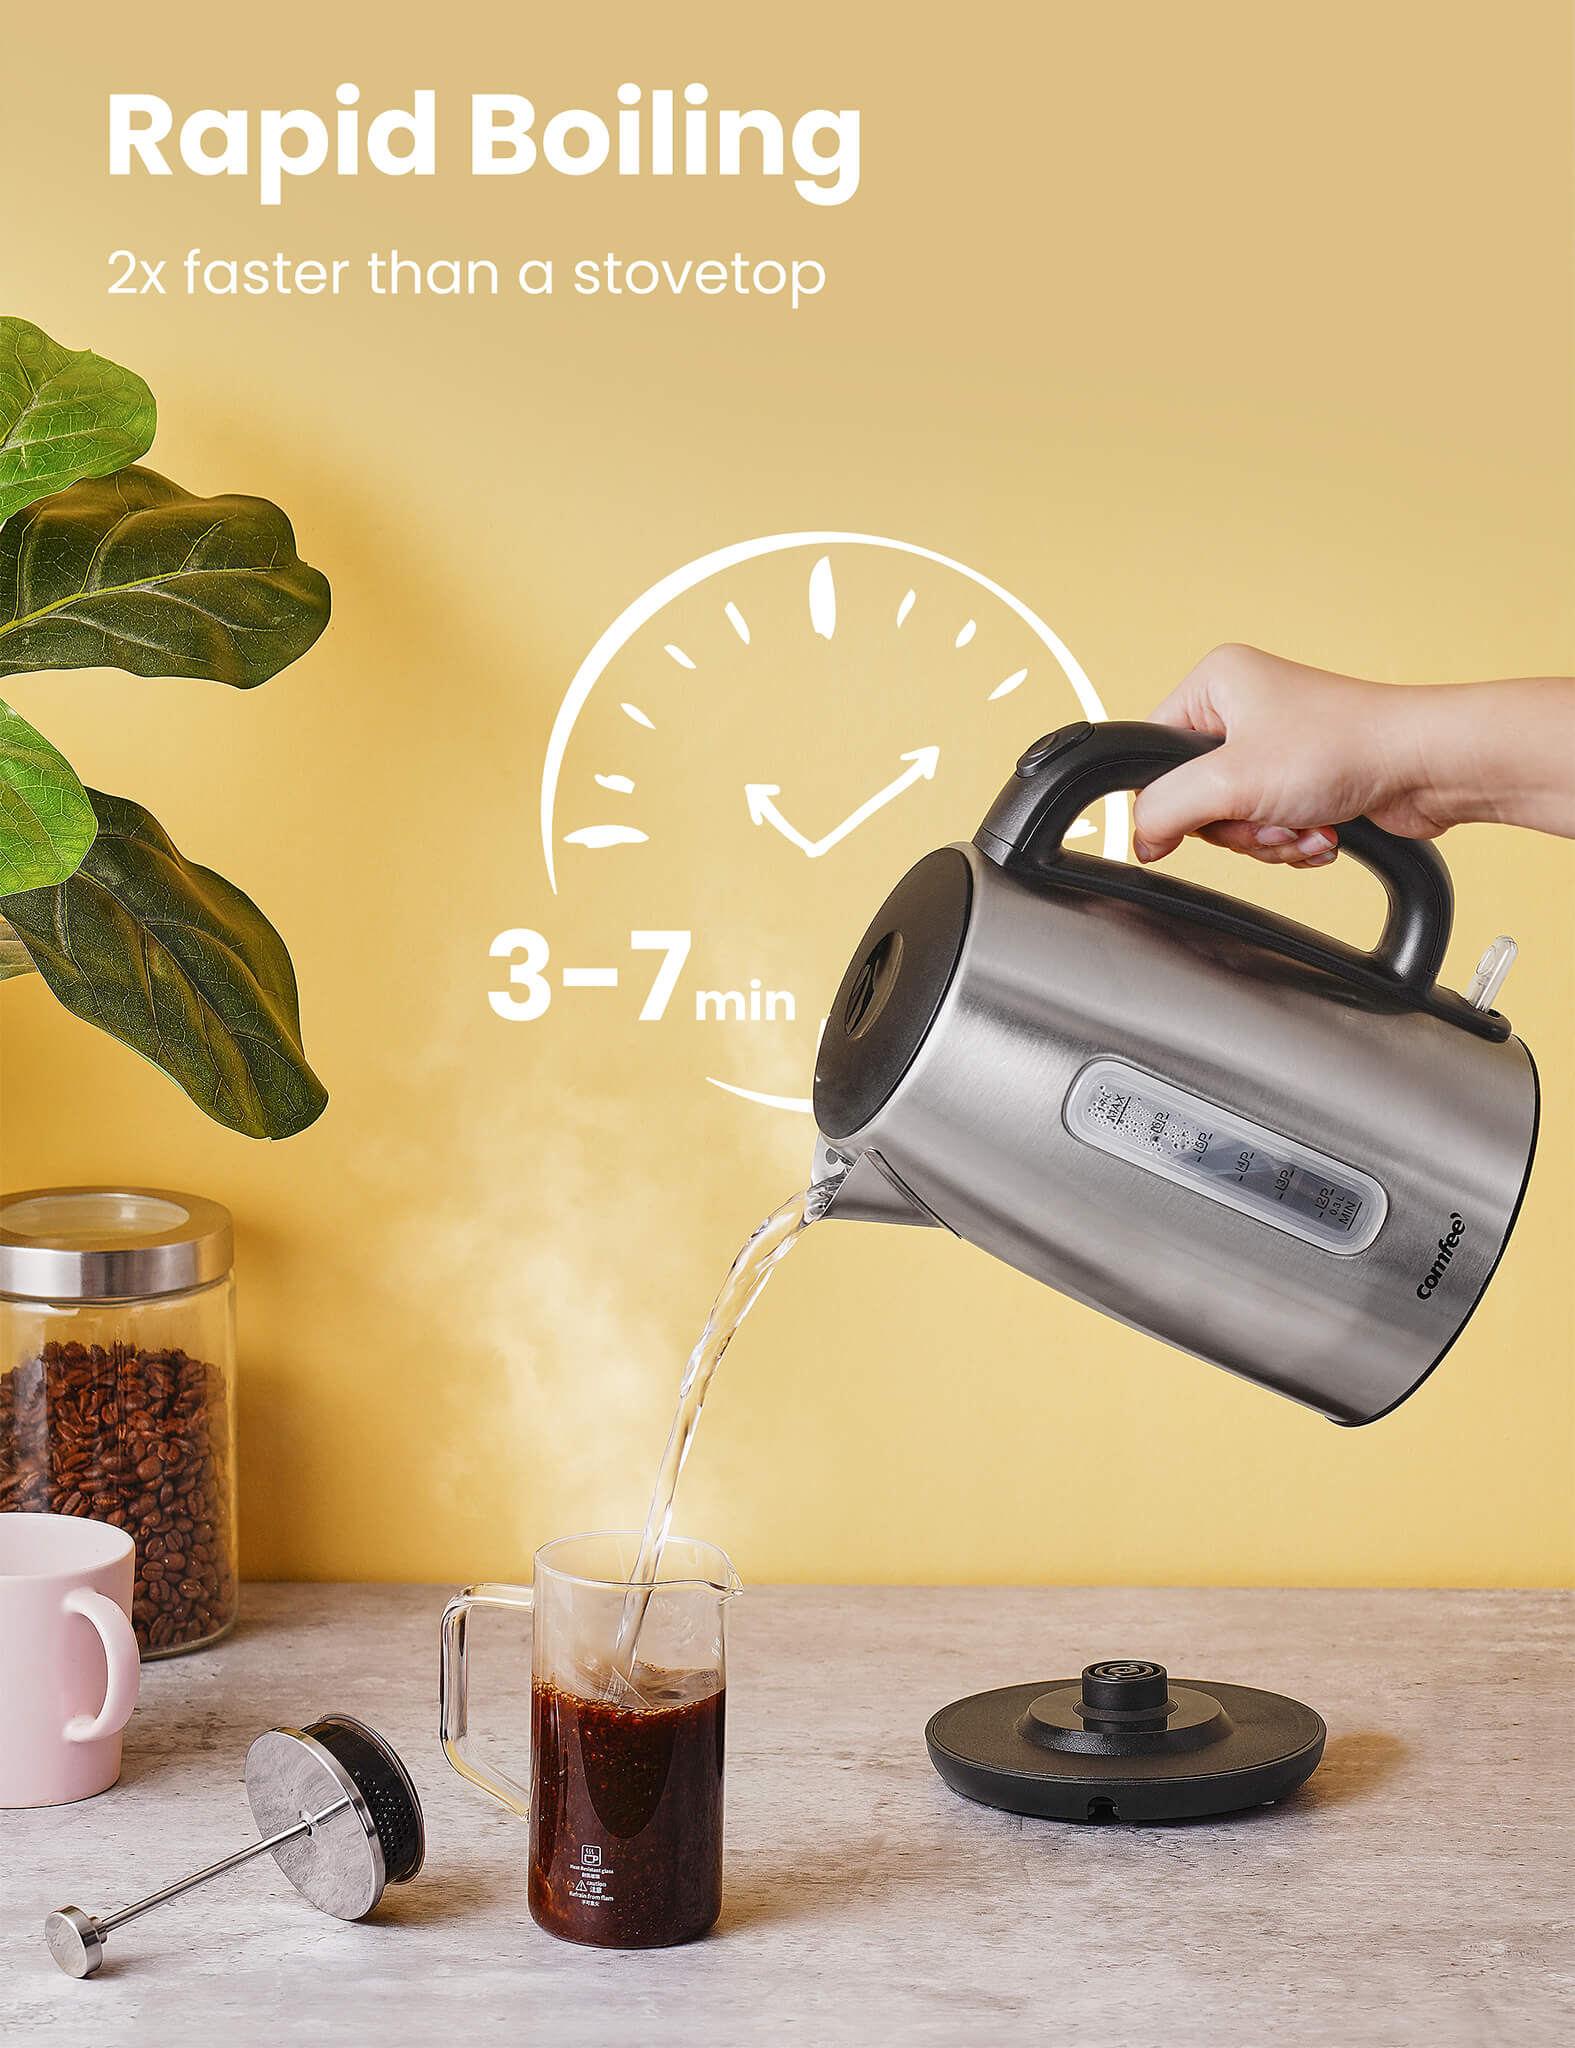 Use comfee stainless steel electric kettle to boil water to make a cup of coffee